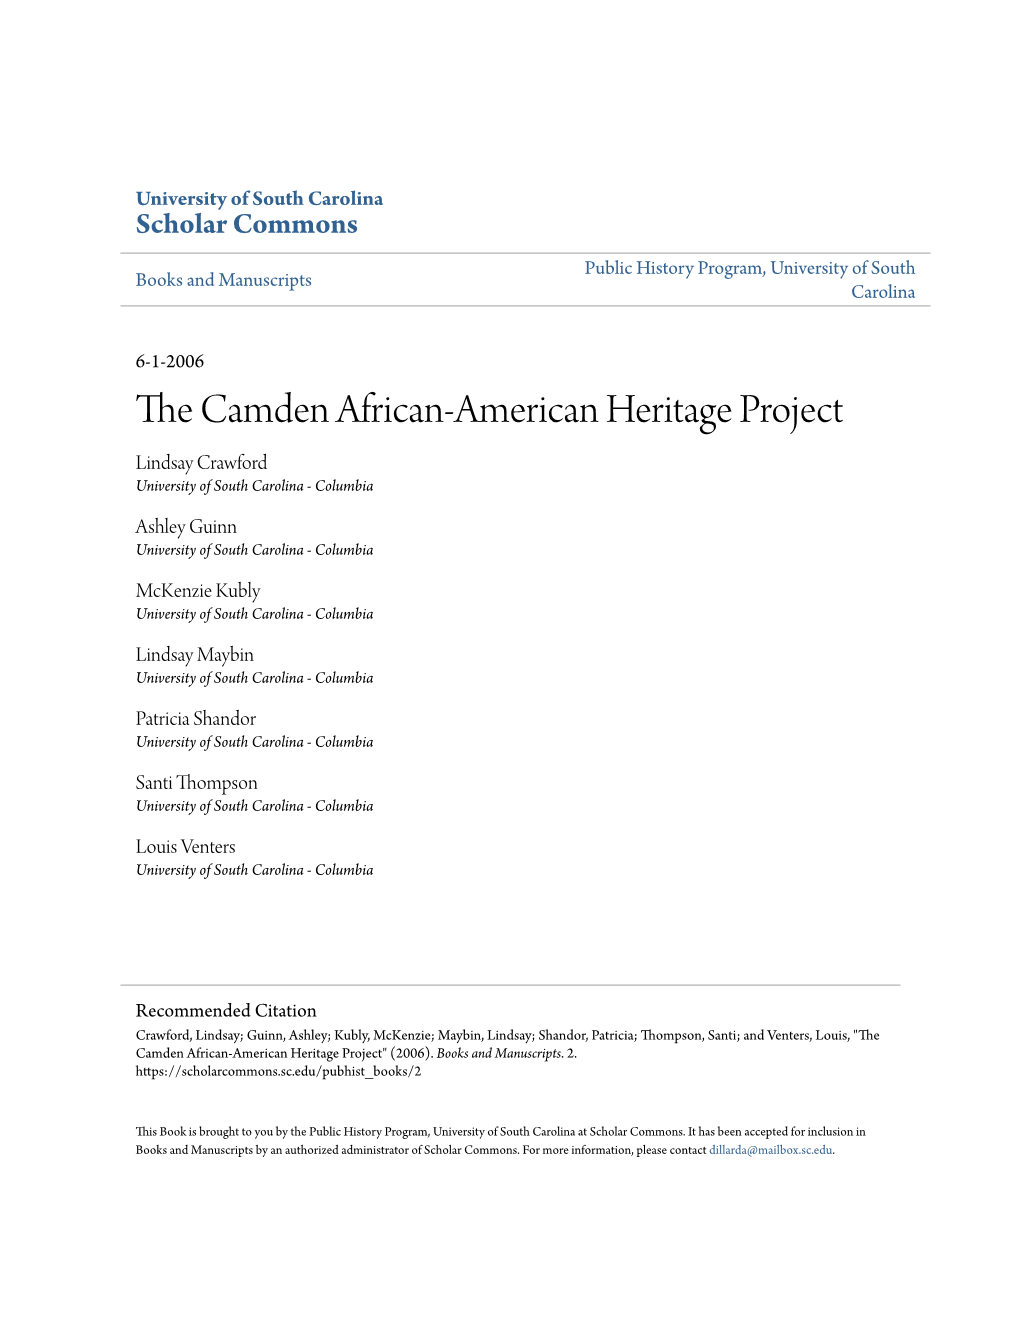 The Camden African-American Heritage Project" (2006)